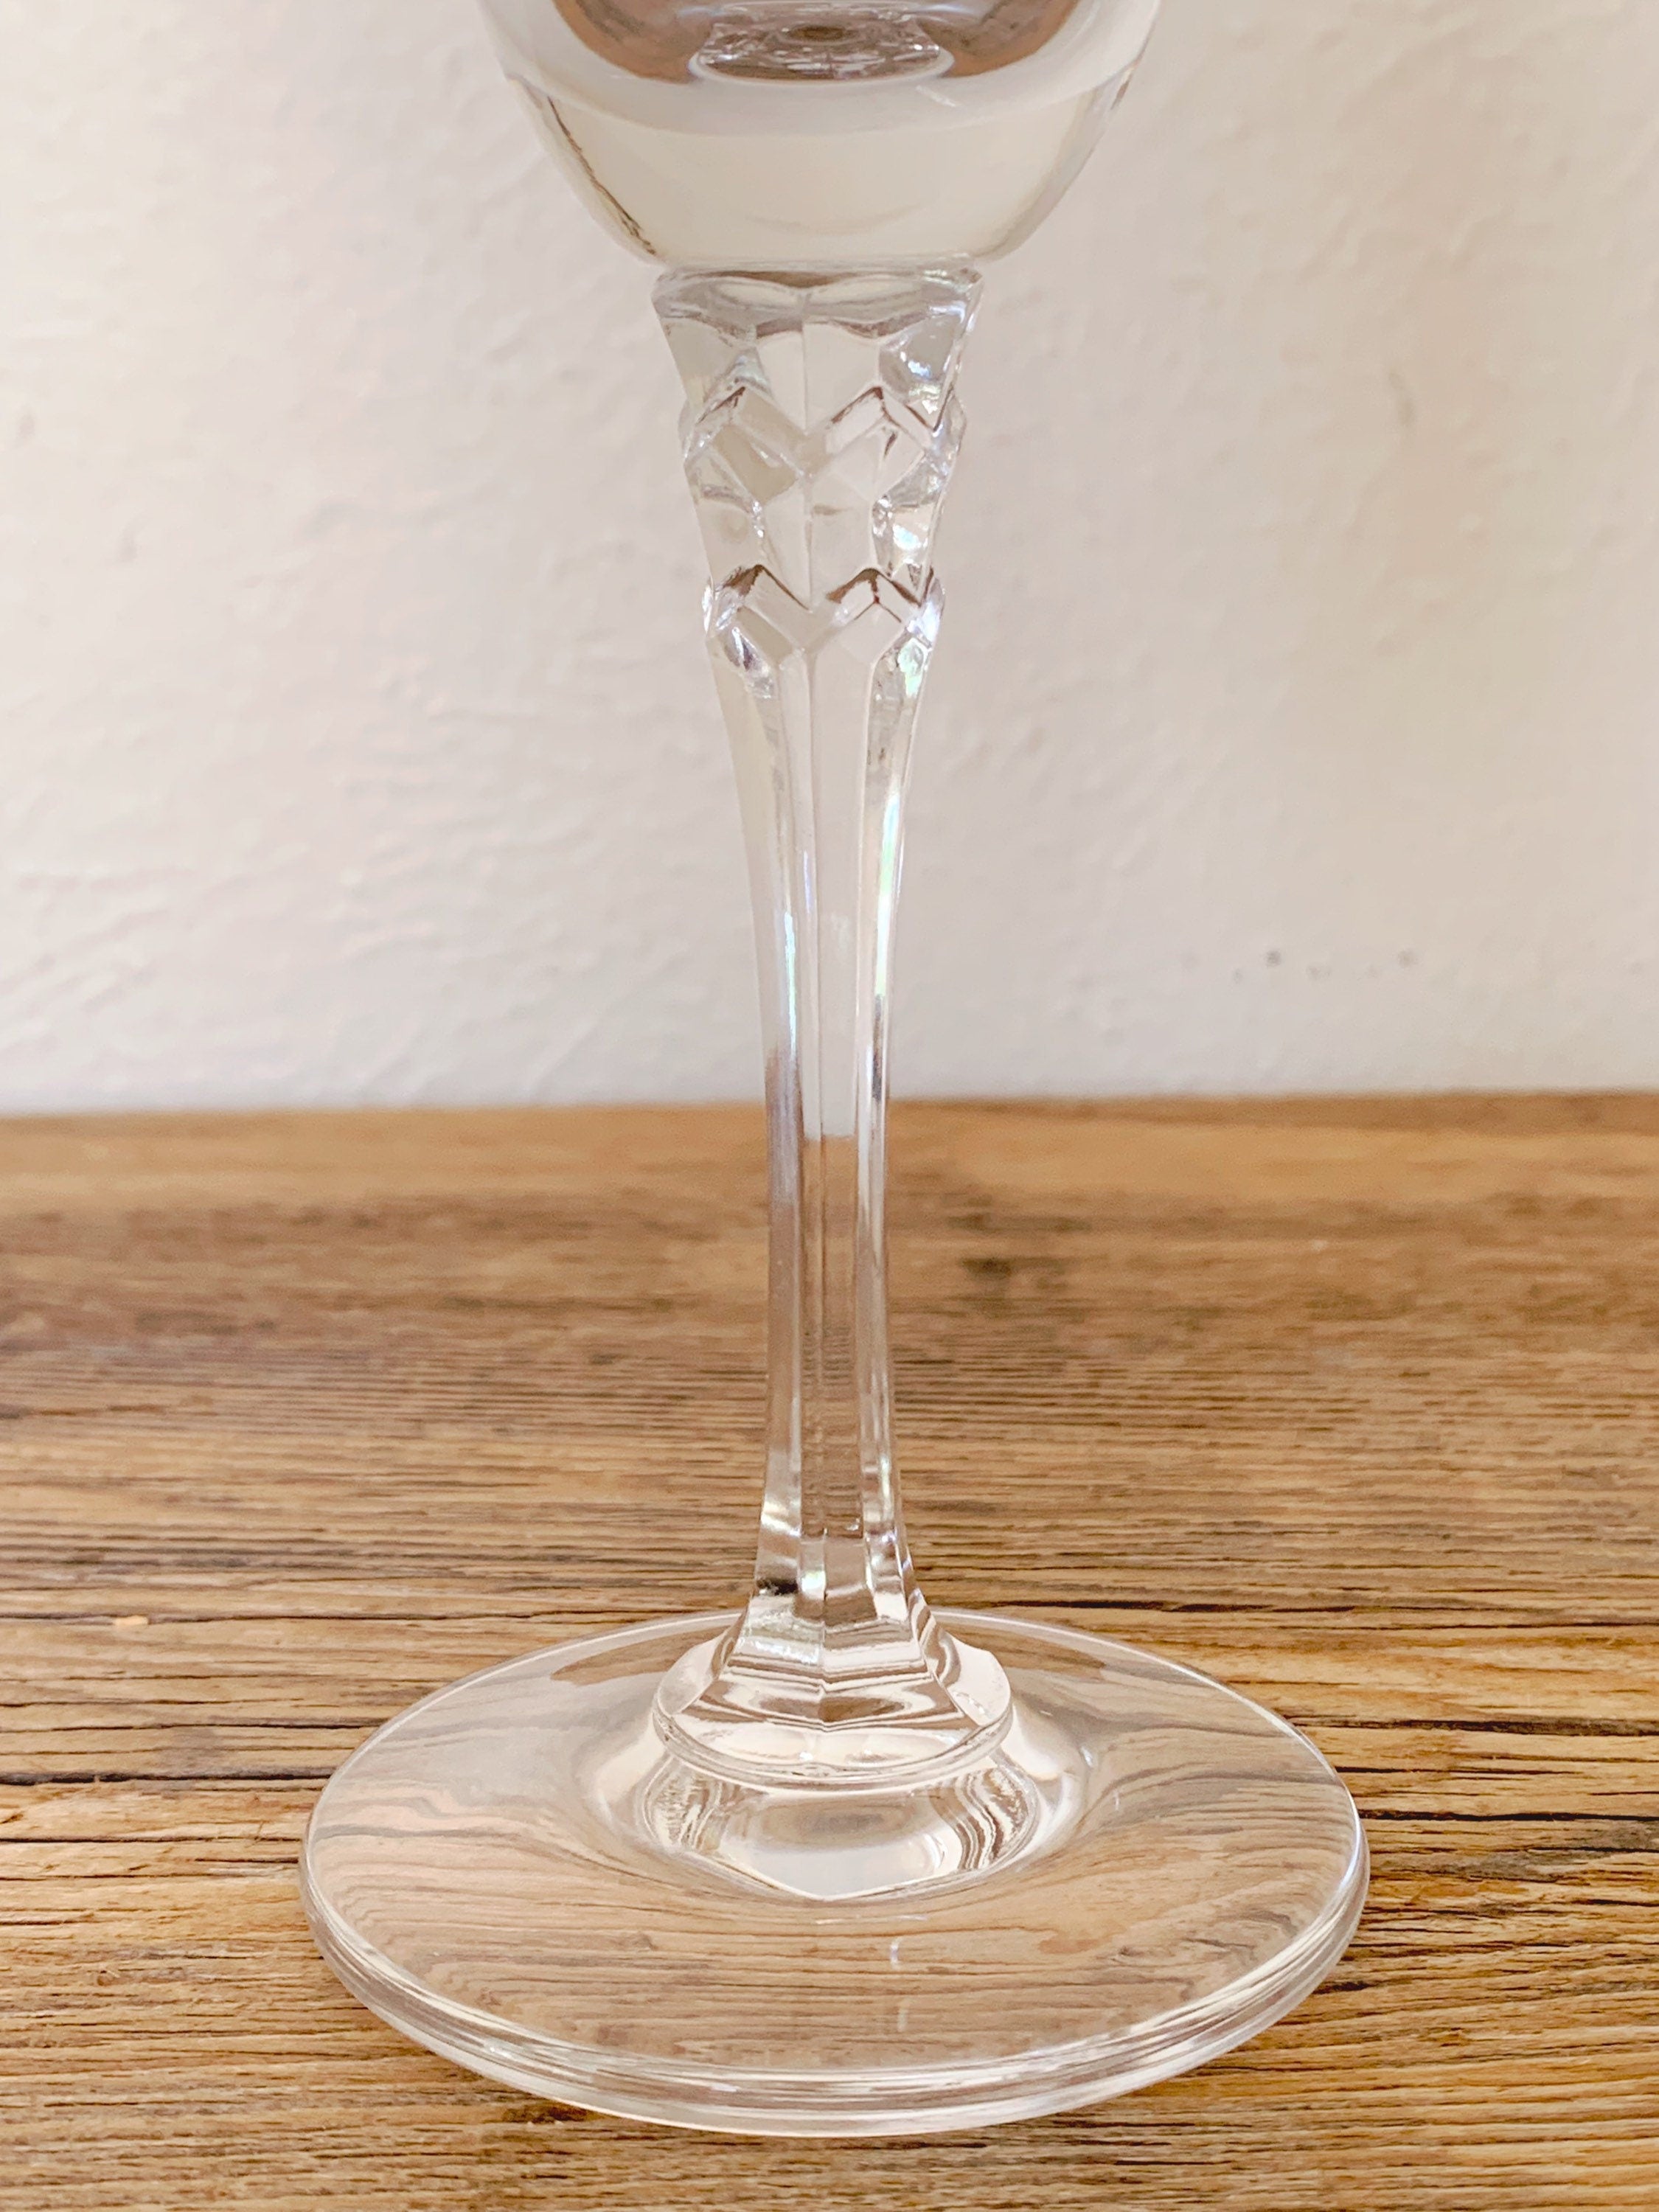 Vintage Premium Crystal Champagne Flutes in Set of 2, 4, 6 or 8 | Clear Crystal Wine Glasses with Decorative Cut Stem | New Years Party